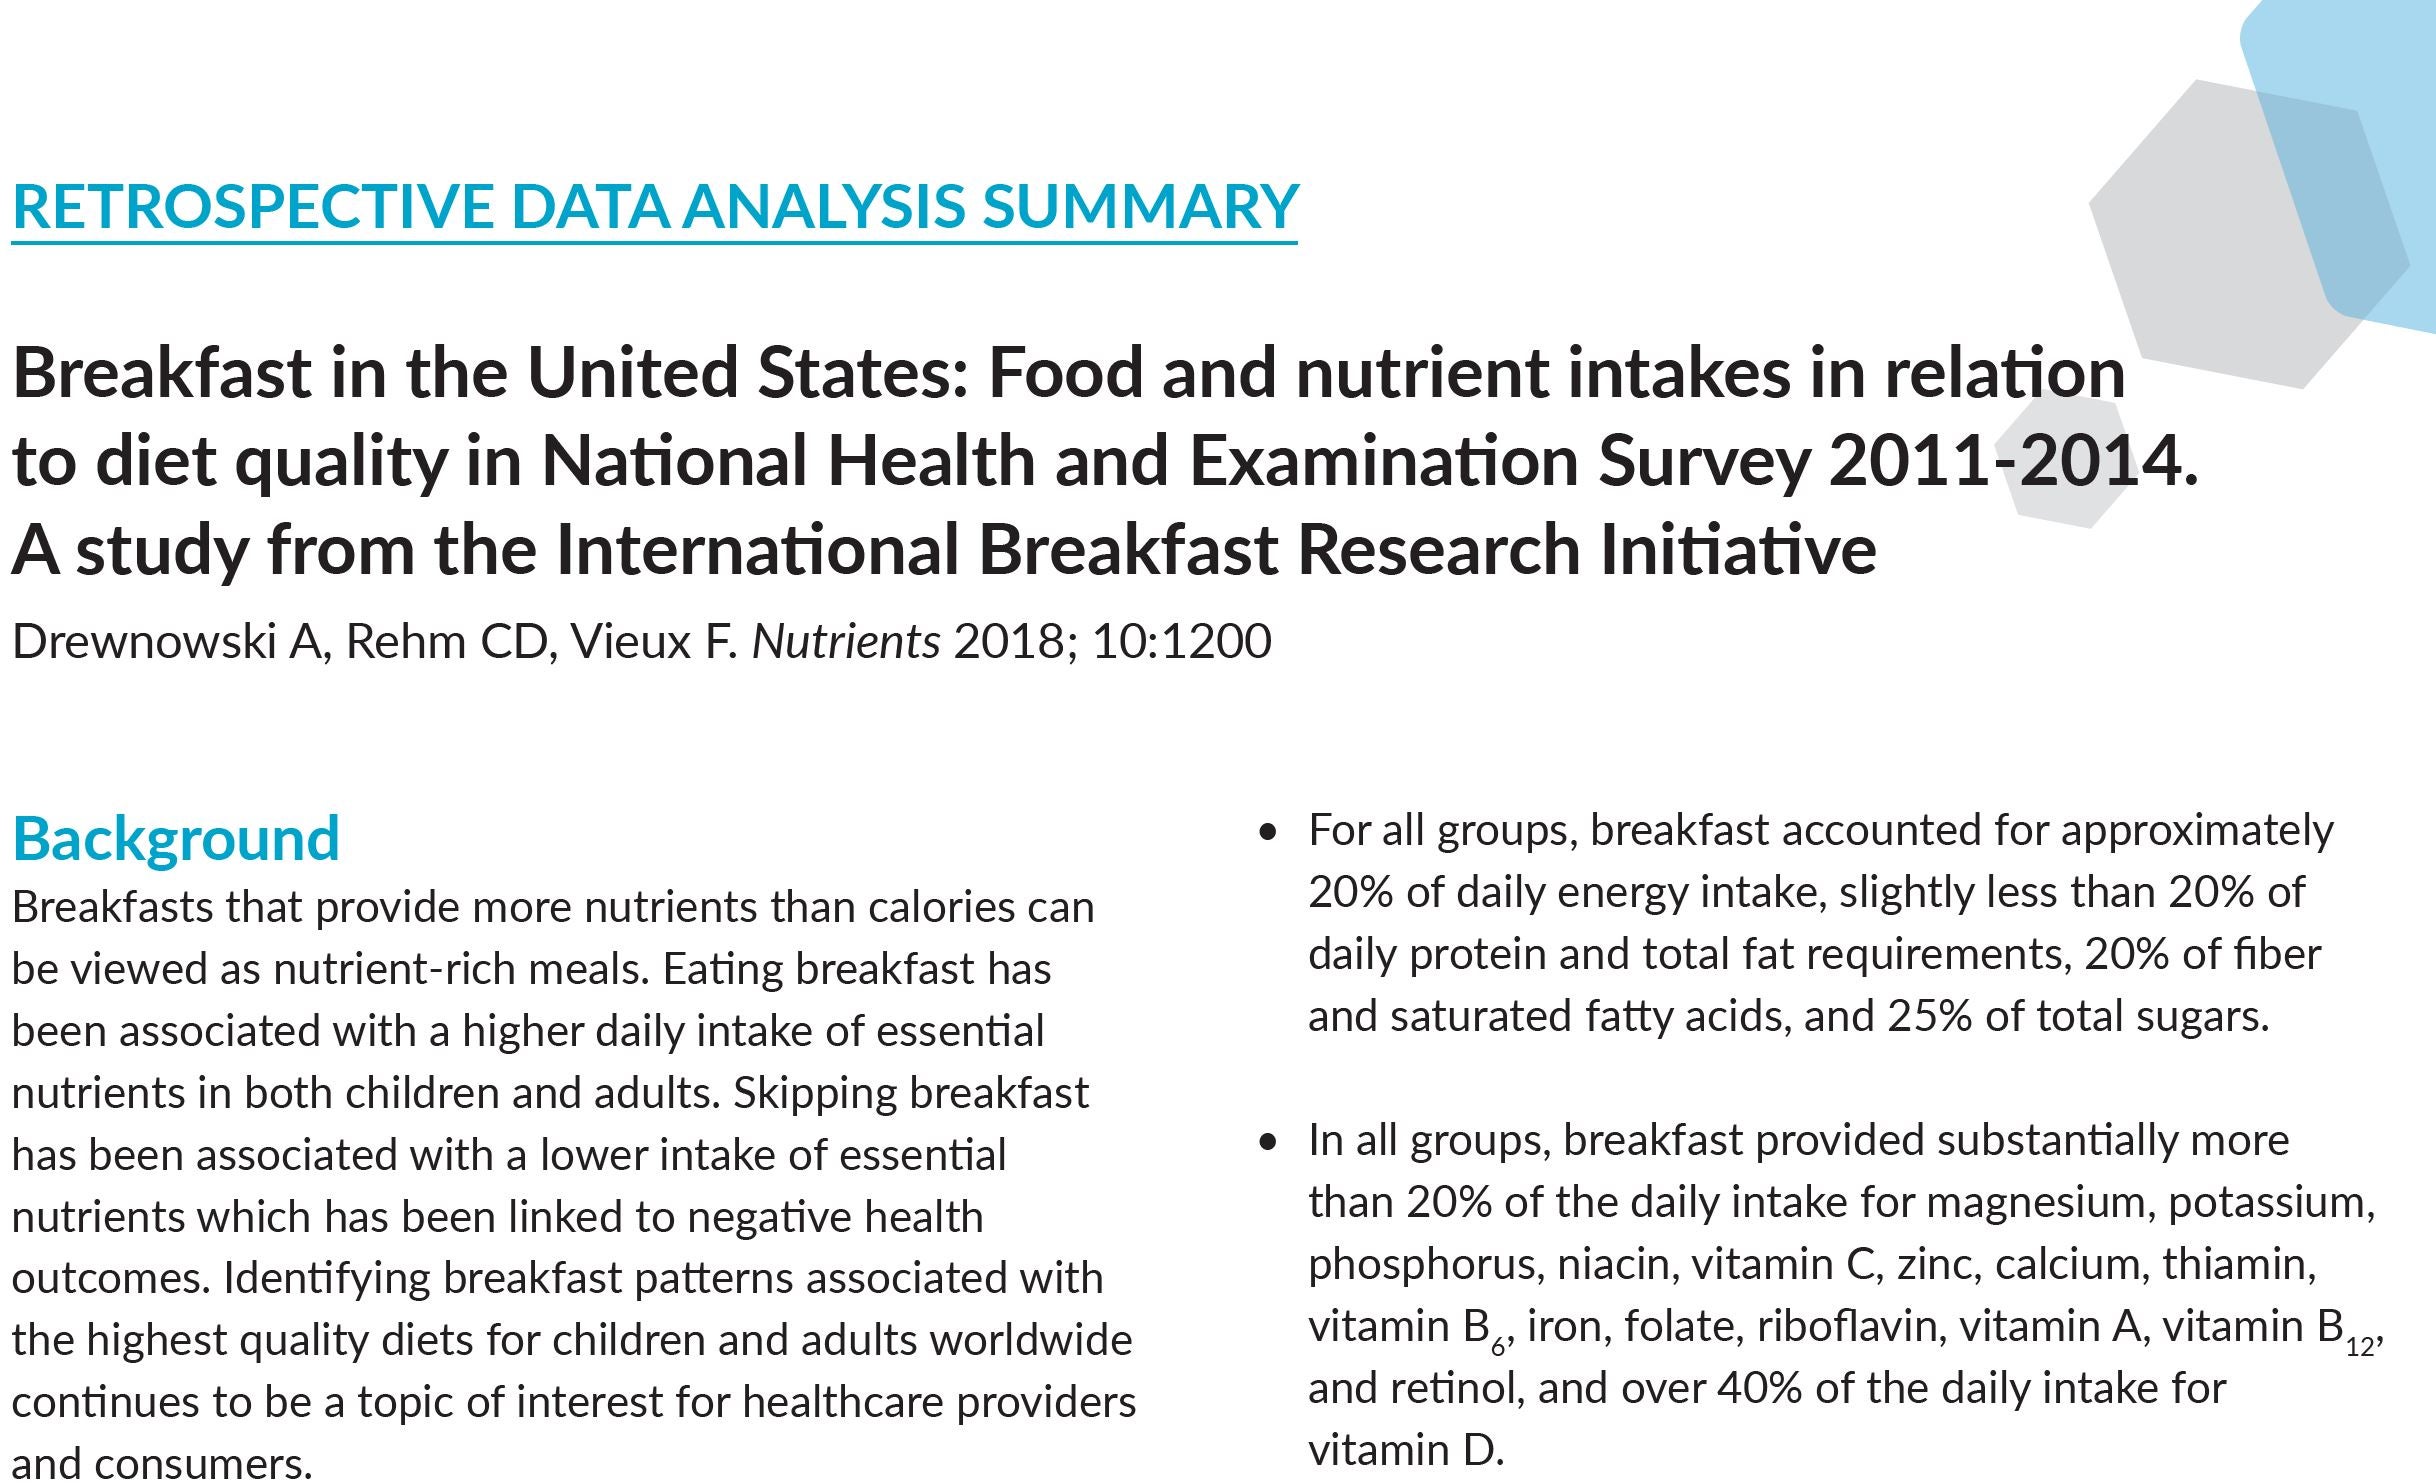 Breakfast in the US: Food and Nutrient Intakes